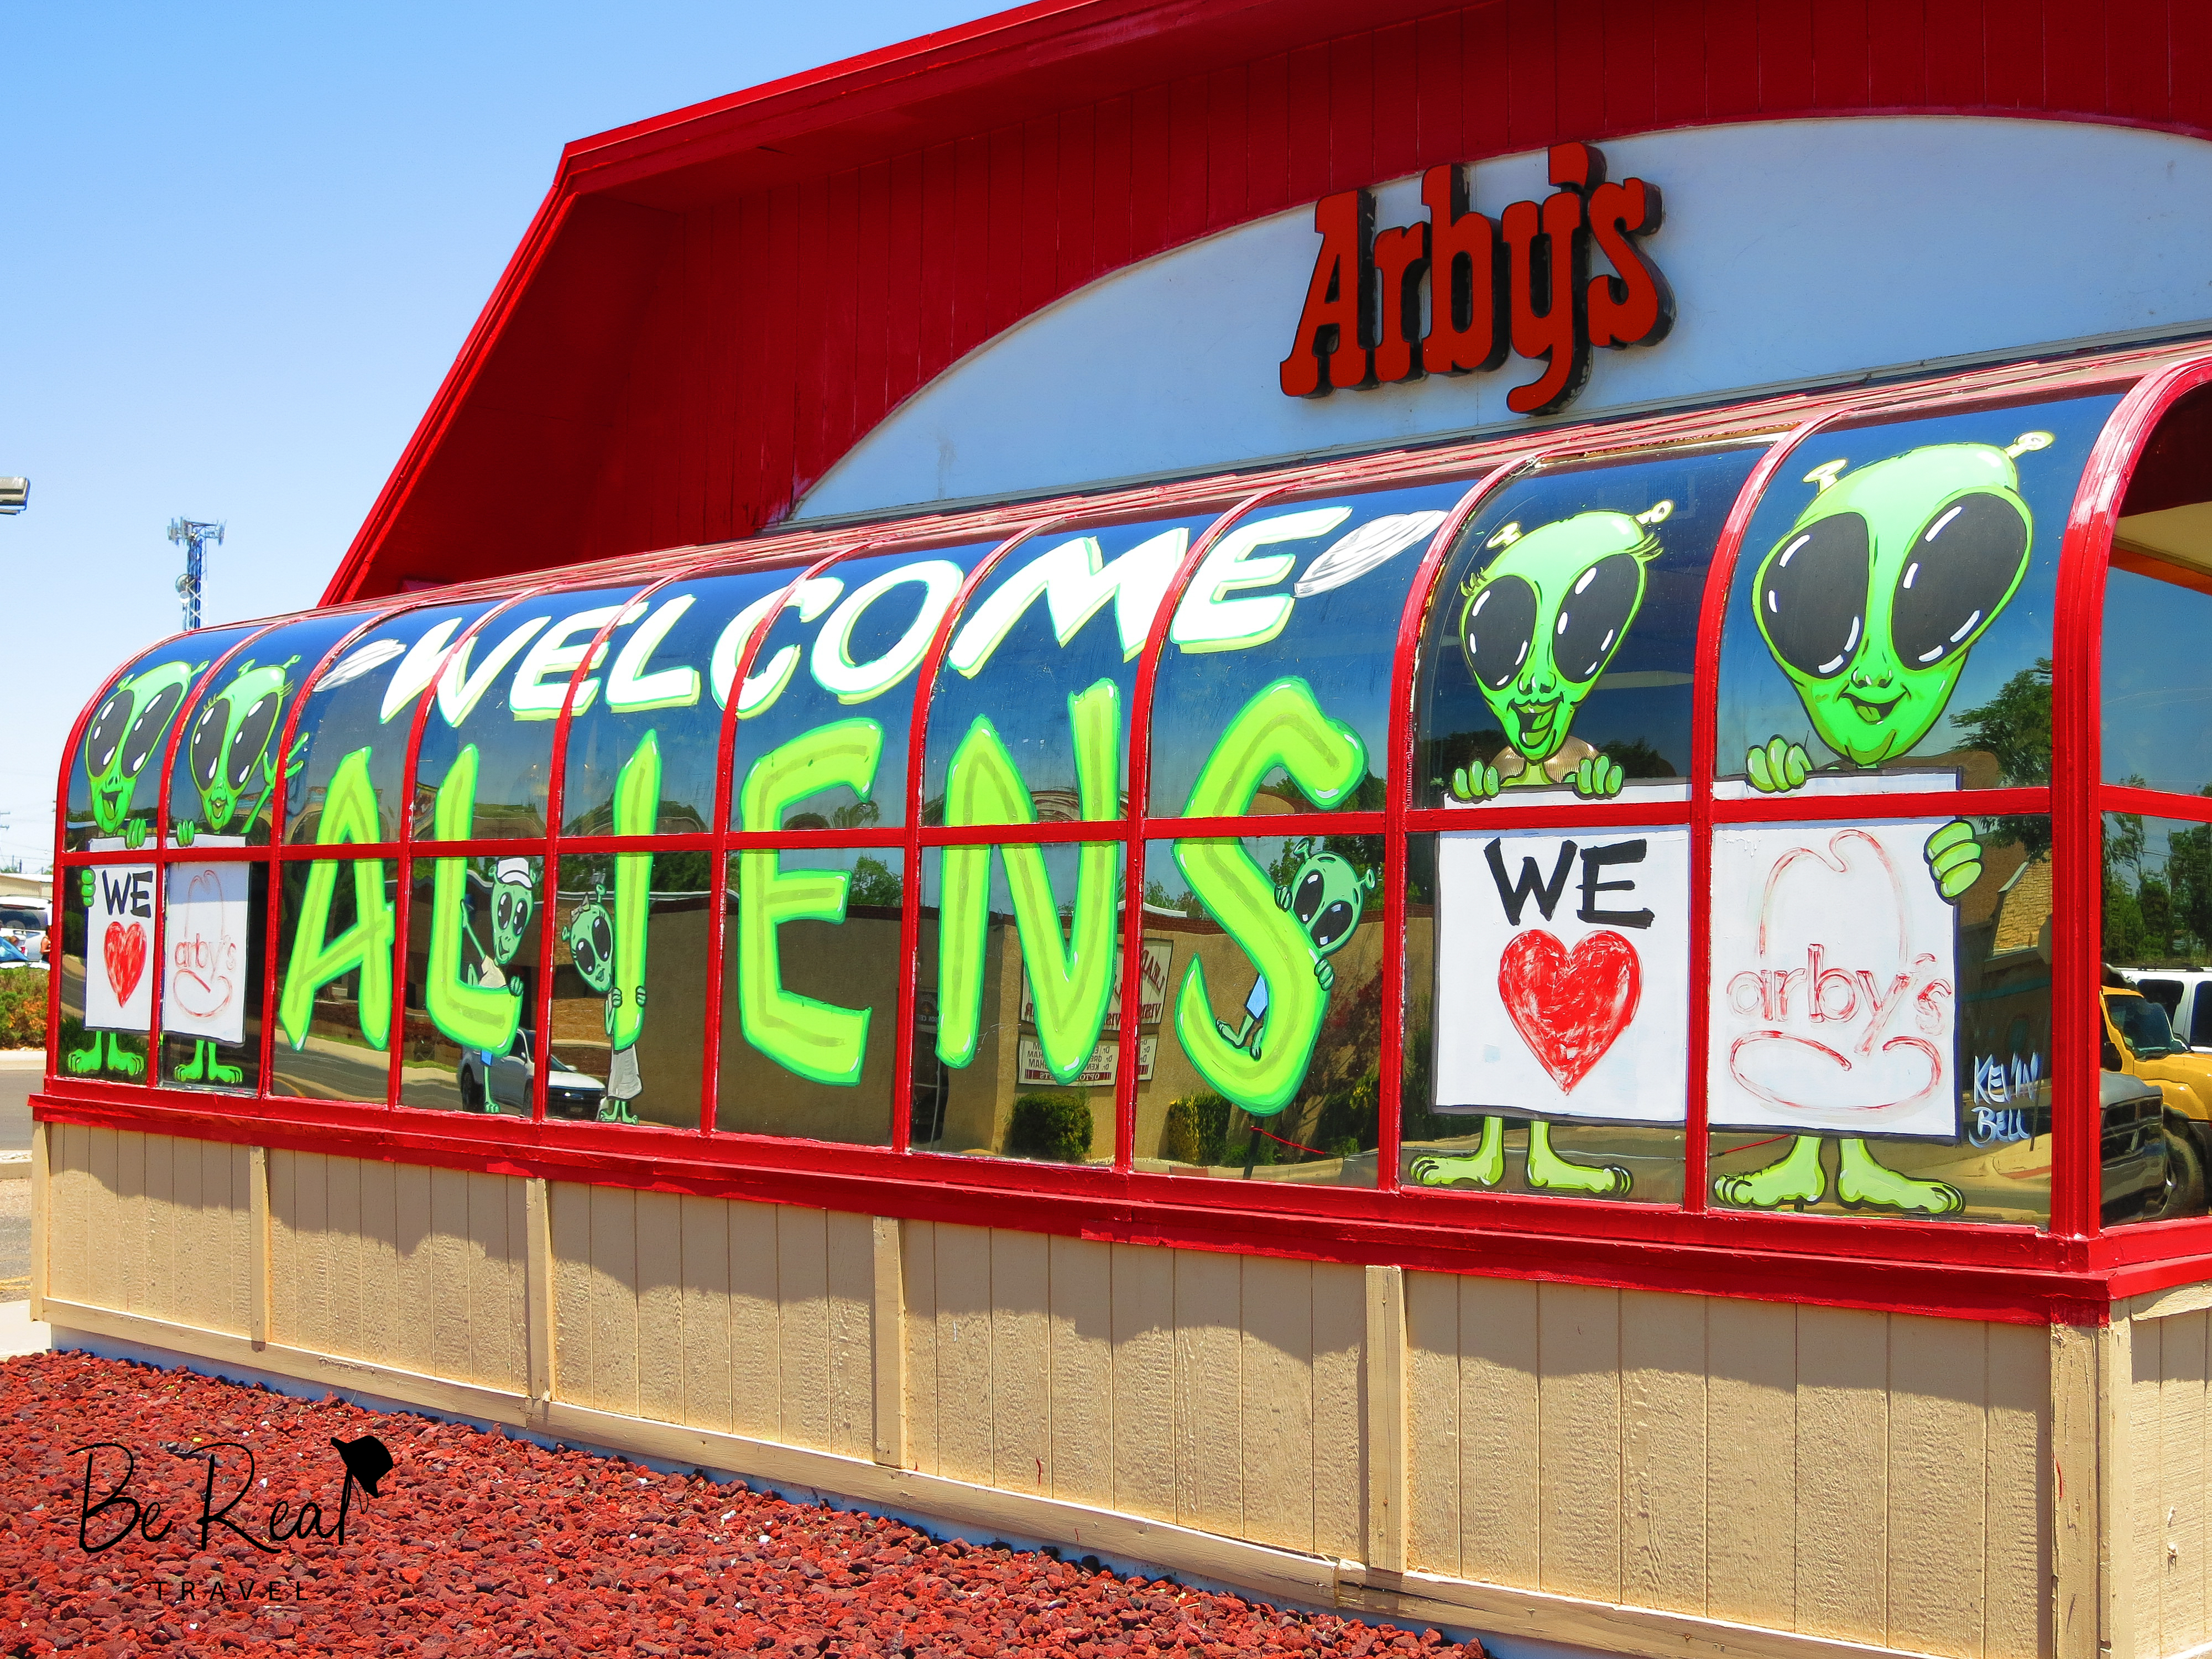 Paintings on an Arby's in Roswell, New Mexico features aliens welcoming visitors